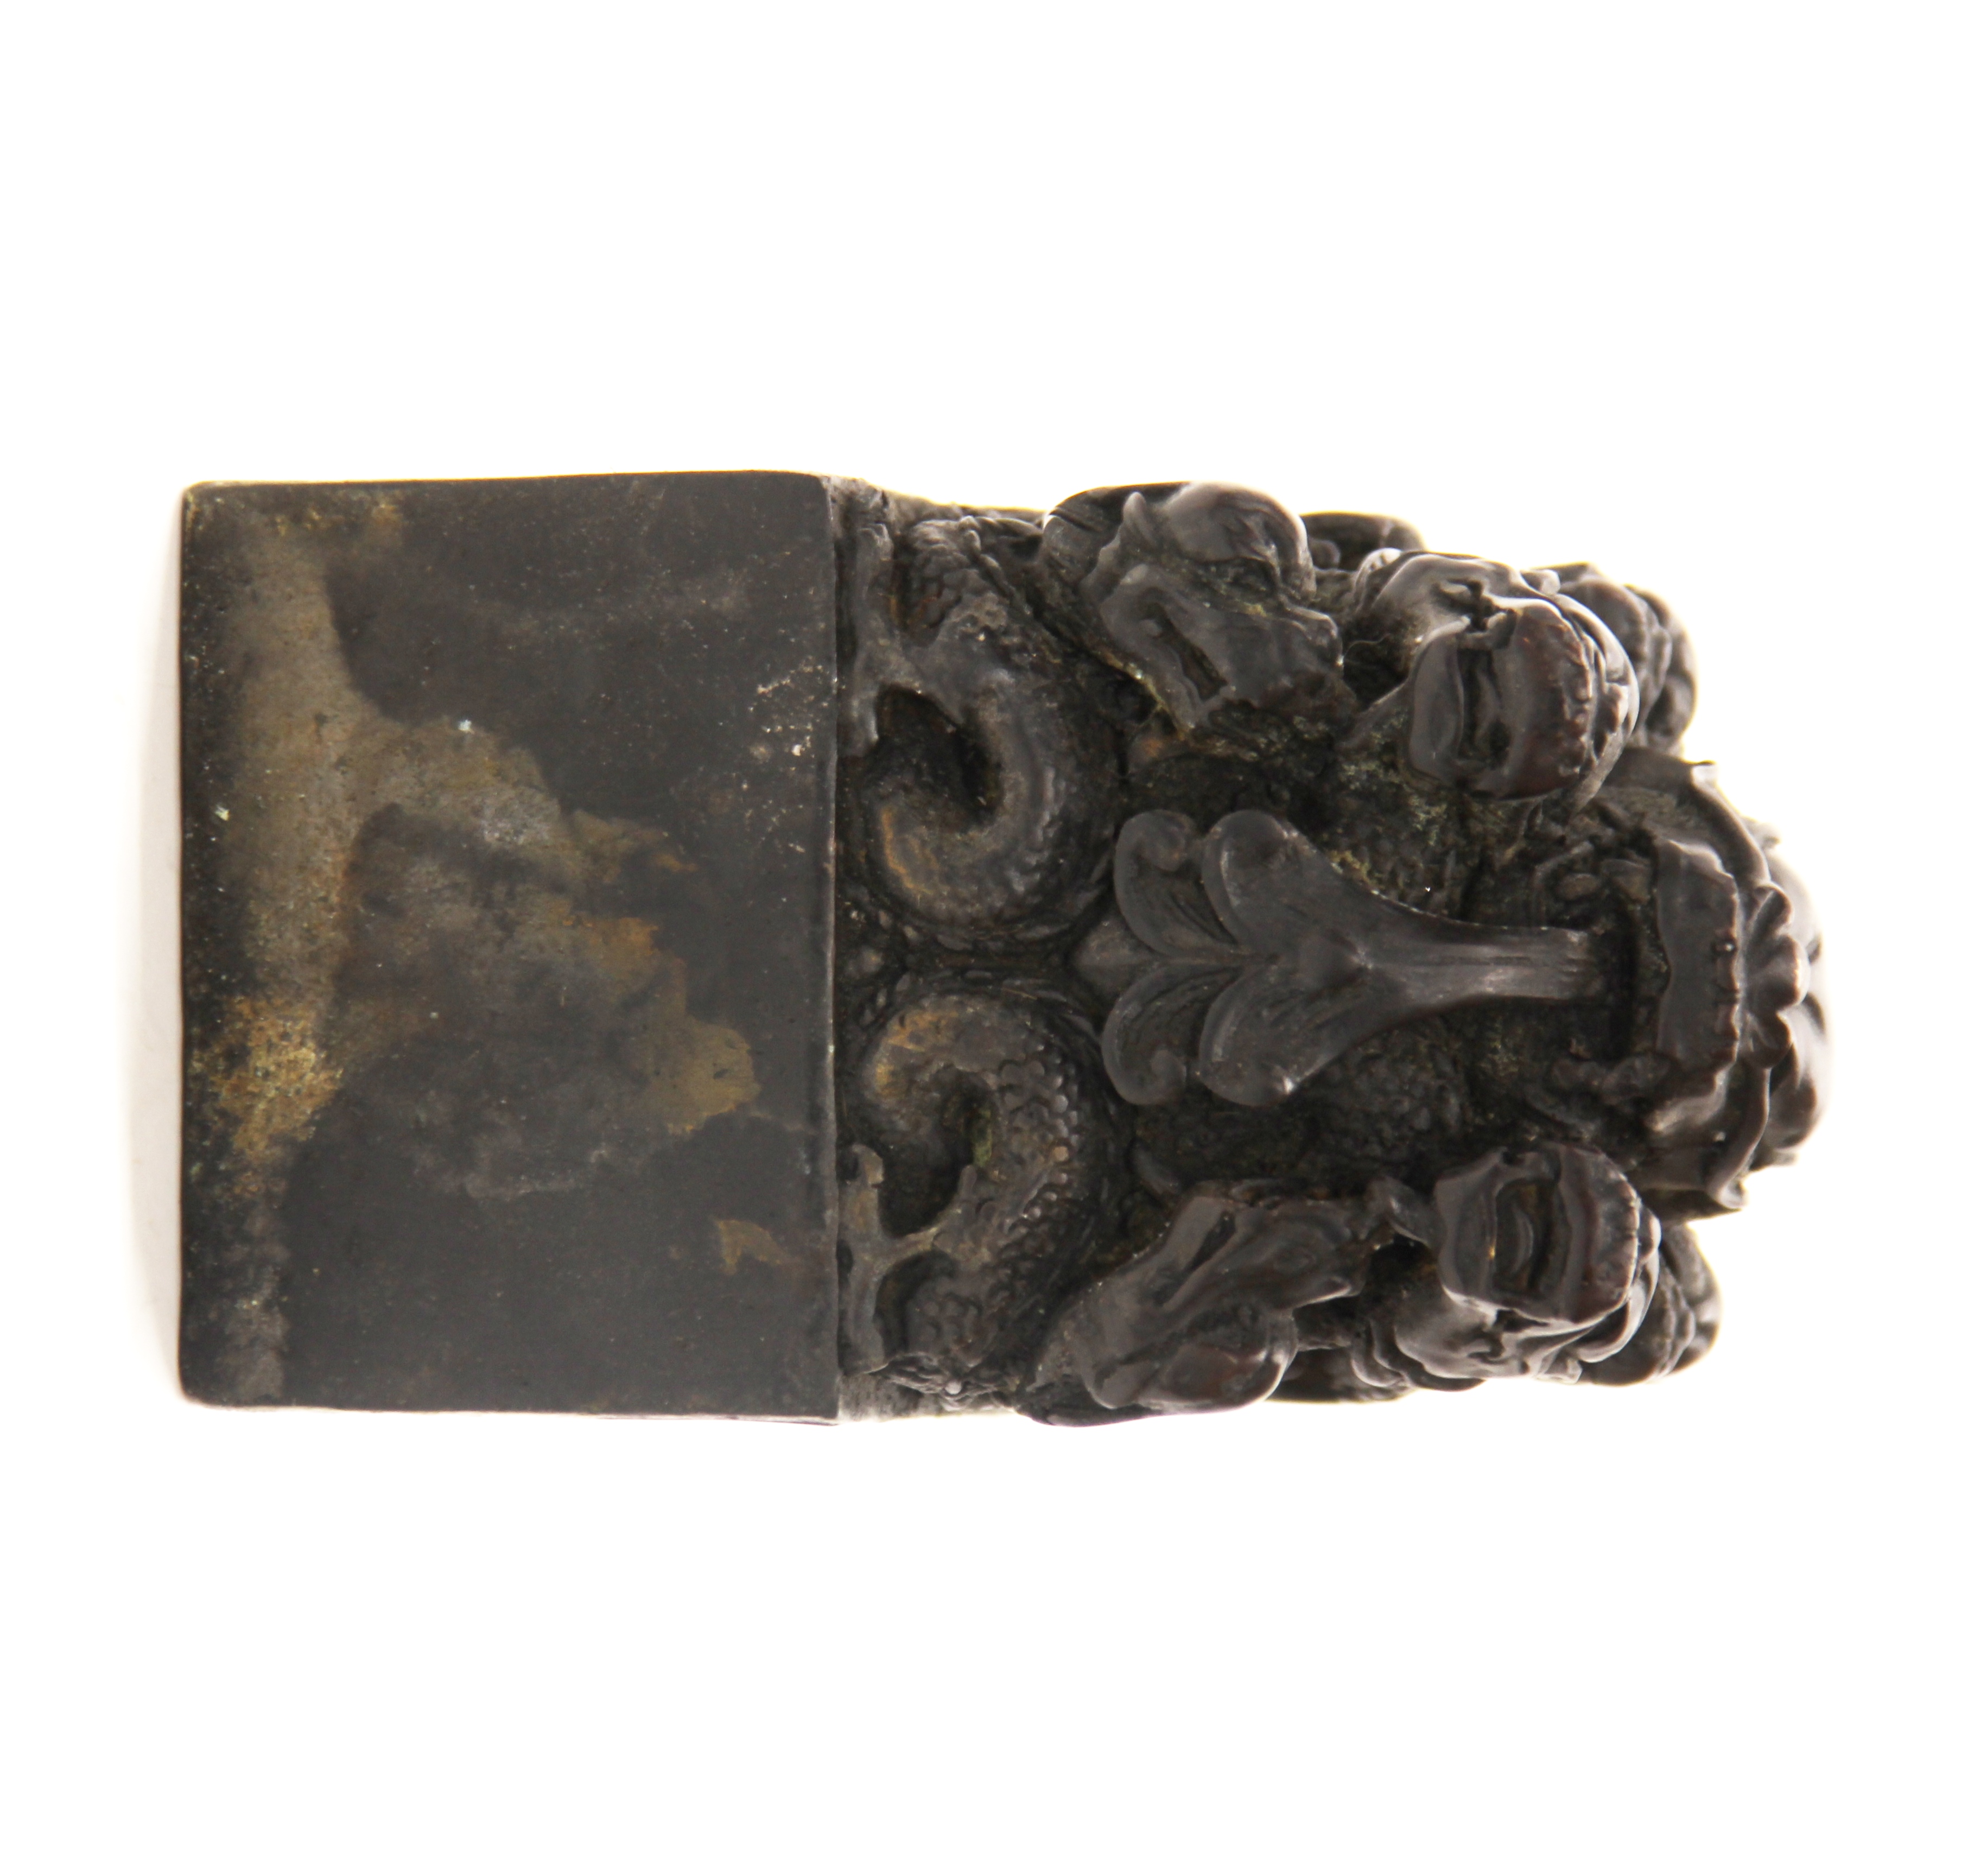 A heavy Chinese cast bronze scholar's seal decorated with dragons, H. 14cm. - Image 2 of 5